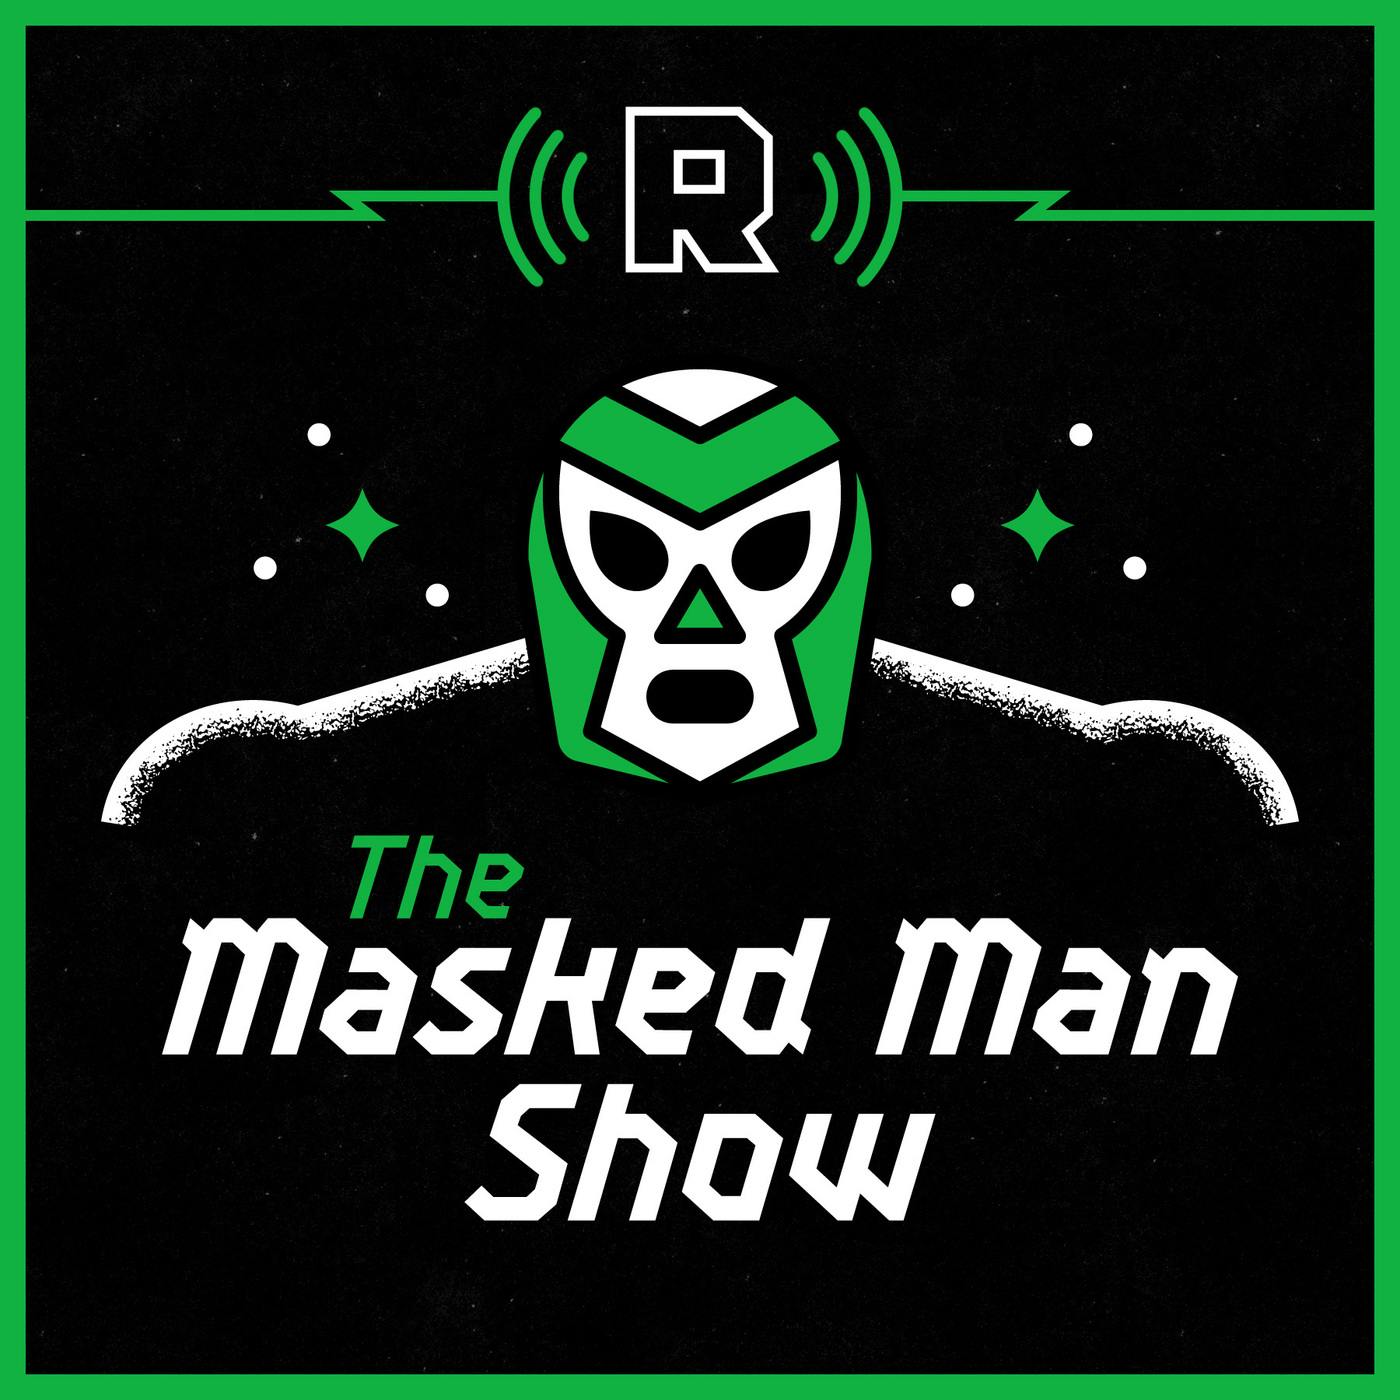 Peter Rosenberg on AEW and the Royal Rumble | The Masked Man Show (Ep. 143)